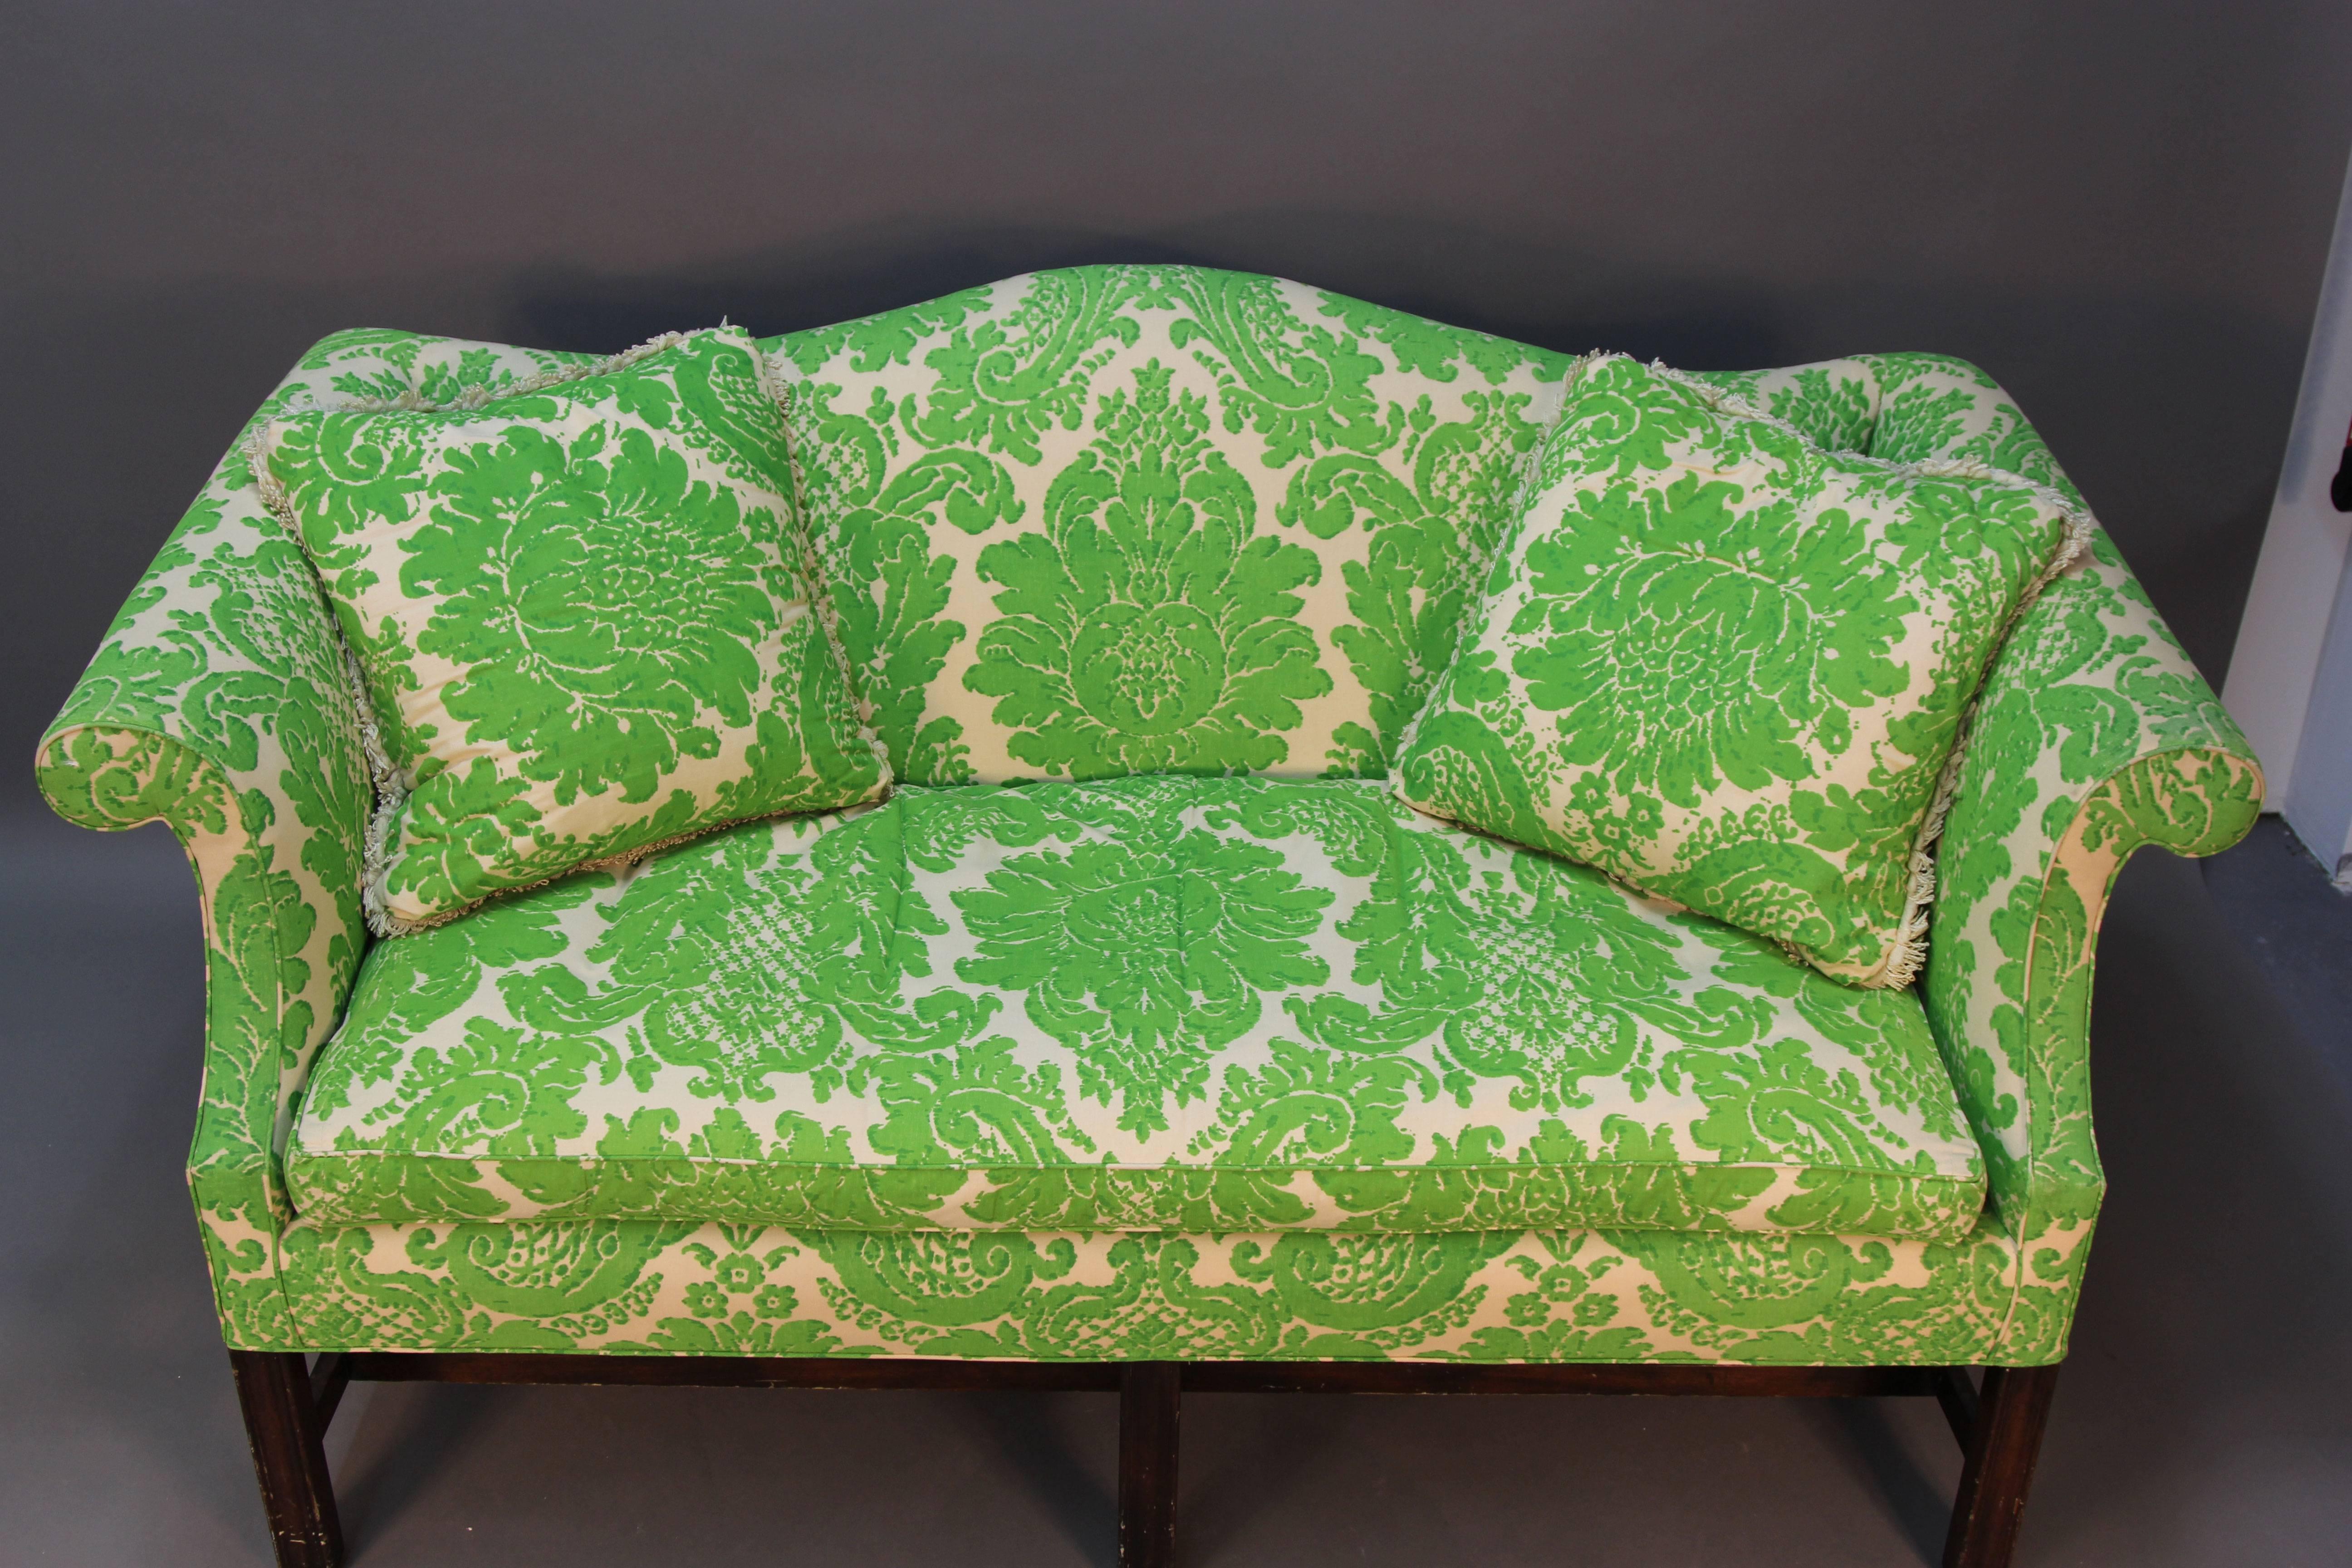 Vintage sofa with custom printed fabric. Very comfortable, iconic 1970s style.